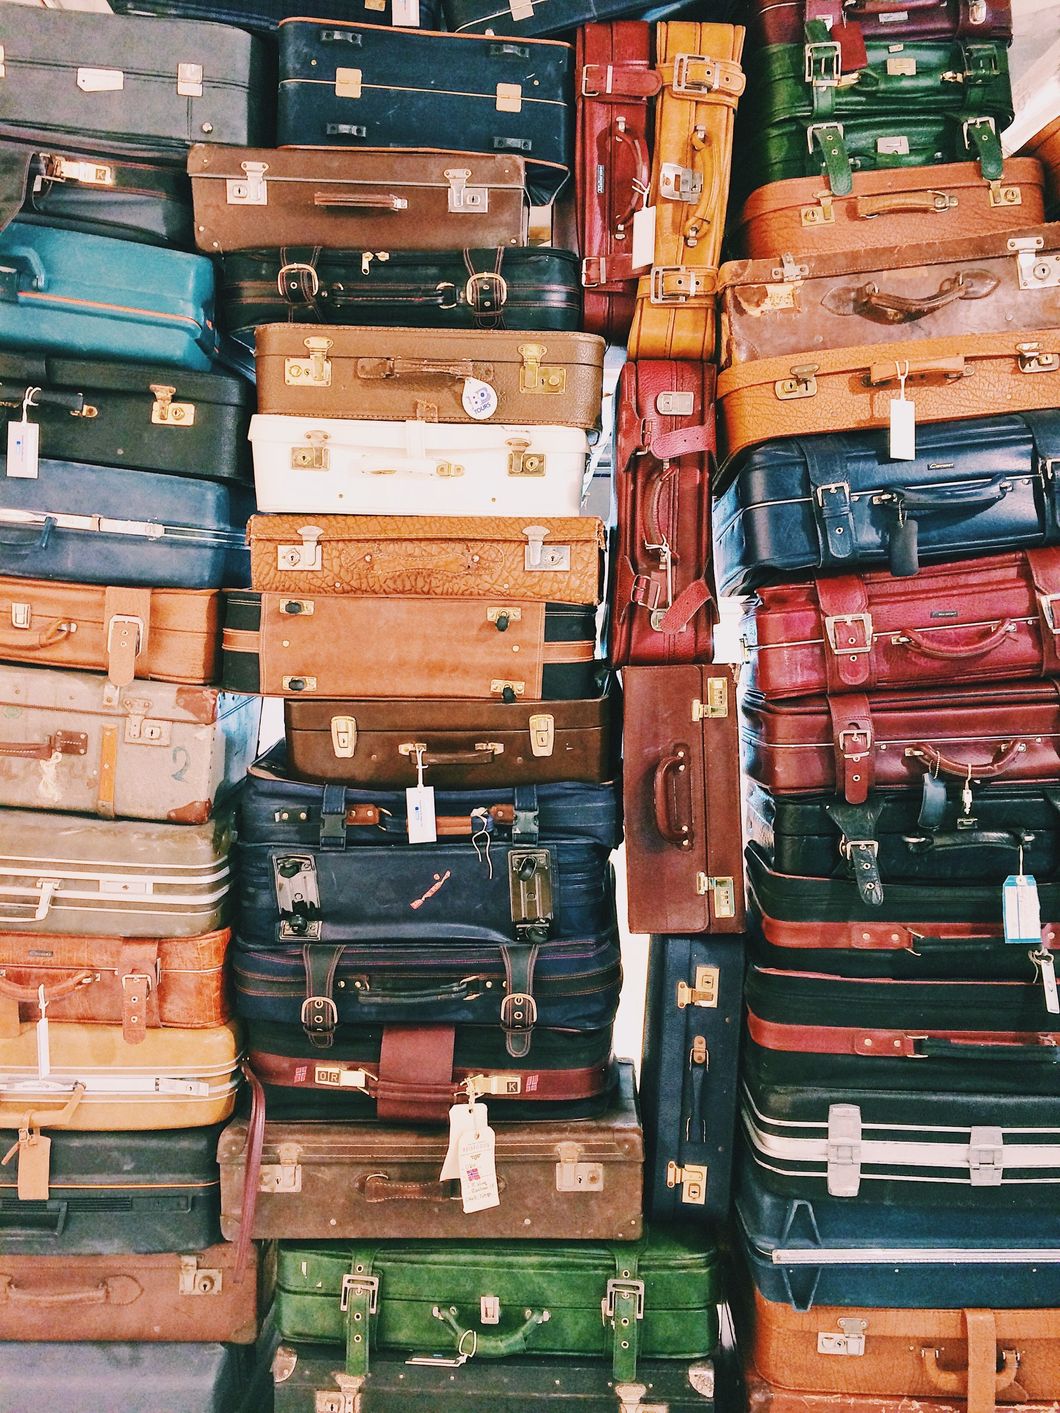 11 Things You Might Not Know You Need To Pack For College